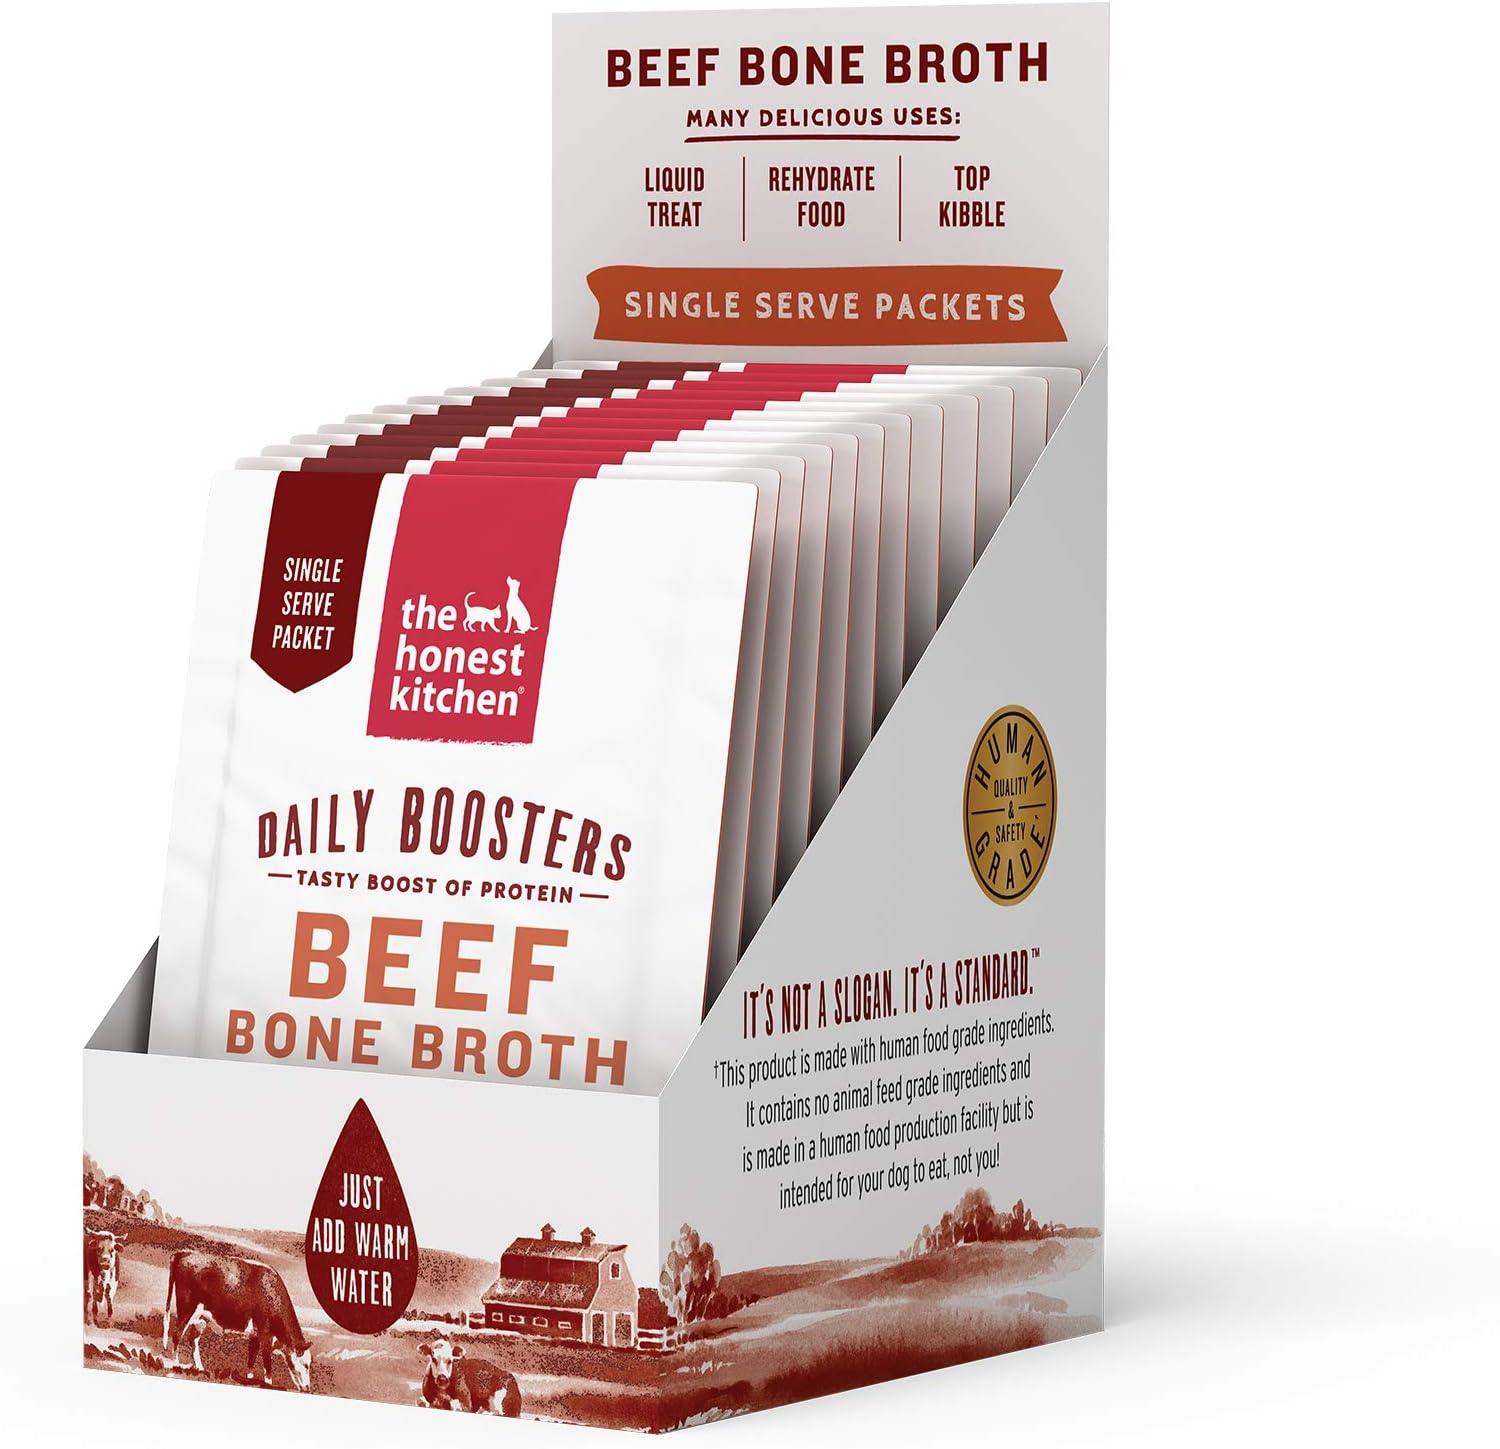 The Honest Kitchen Daily Boosters: Instant Beef Bone Broth with Turmeric for Dogs, 3.5g Sachets, Pack of 12